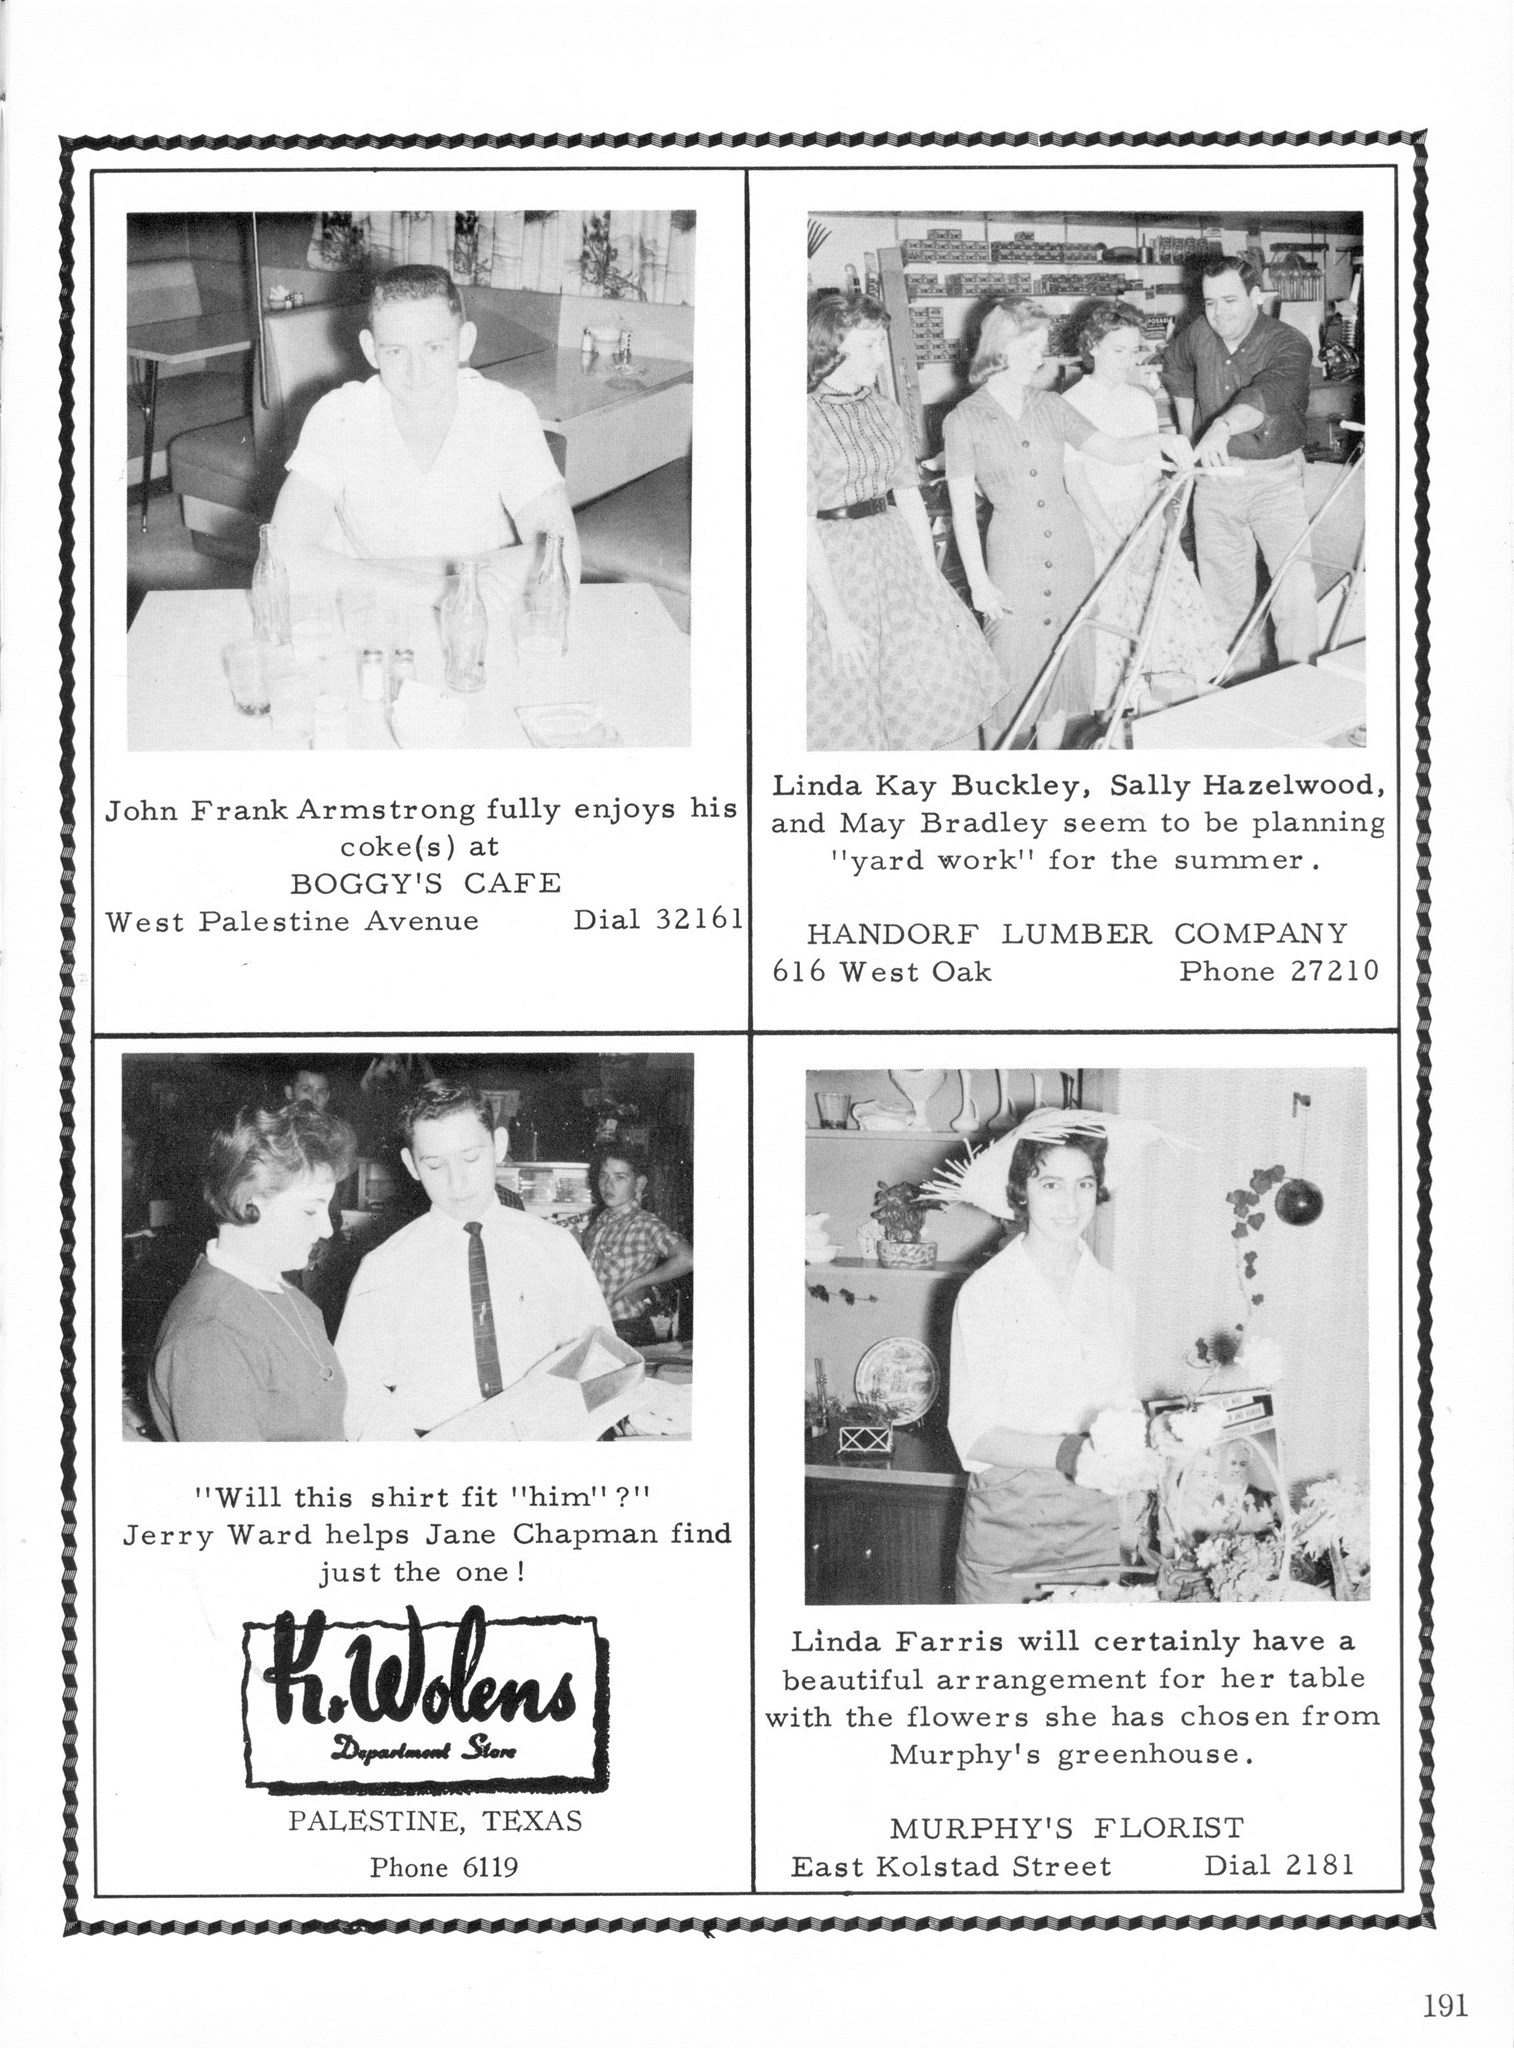 ../../../Images/Large/1959/Arclight-1959-pg0191.jpg